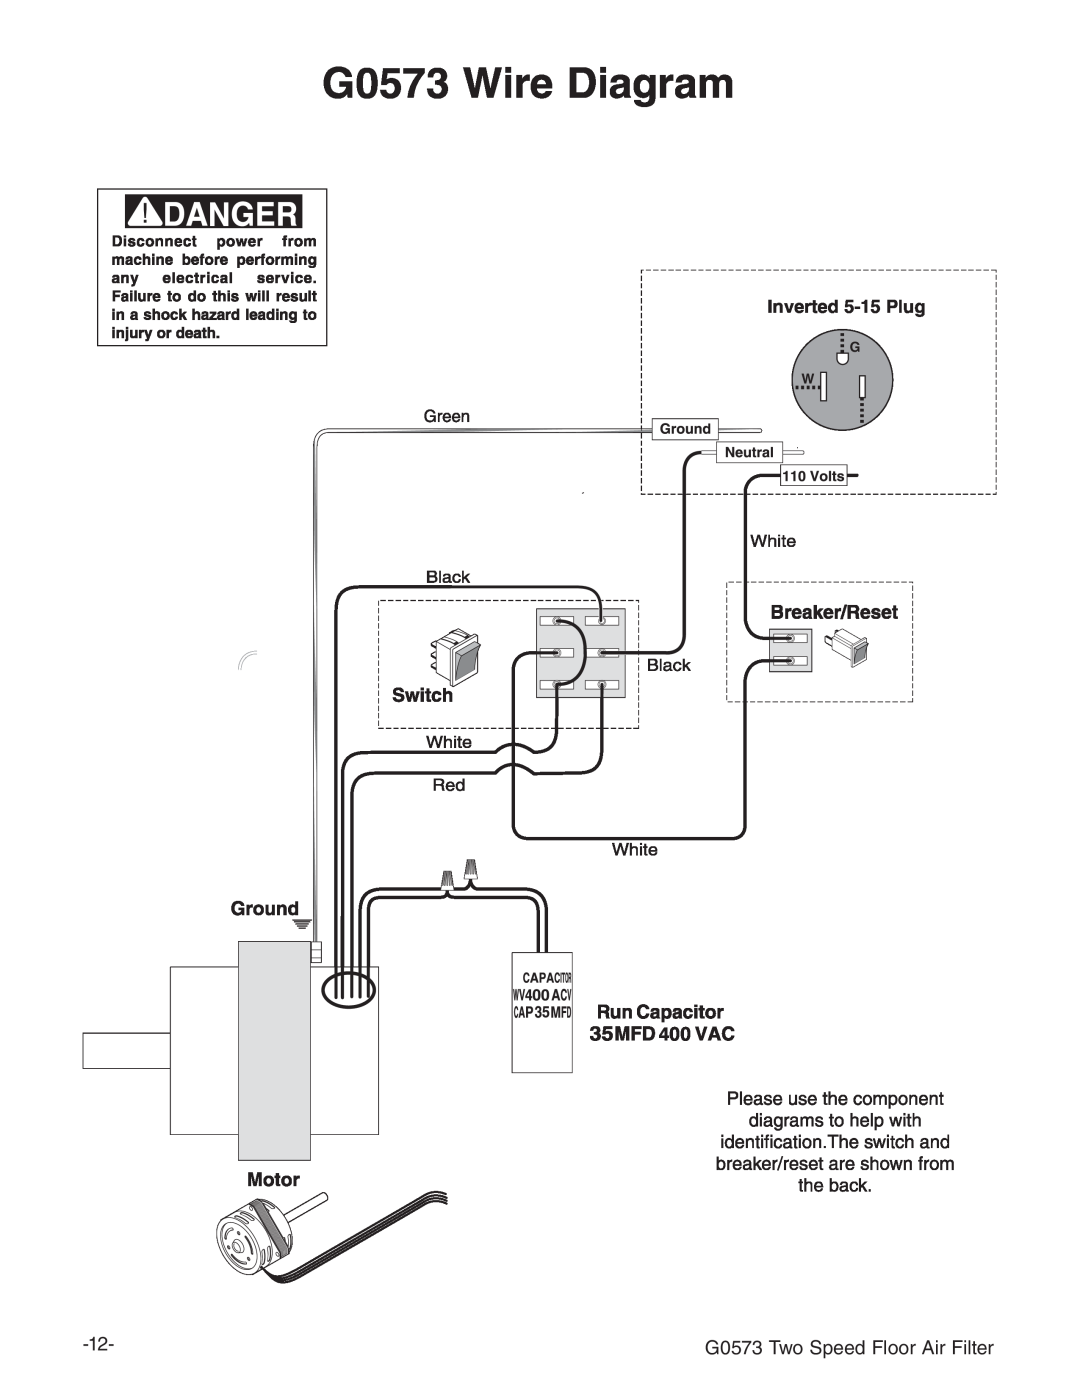 Grizzly instruction manual G0573 Wire Diagram, G0573 Two Speed Floor Air Filter 